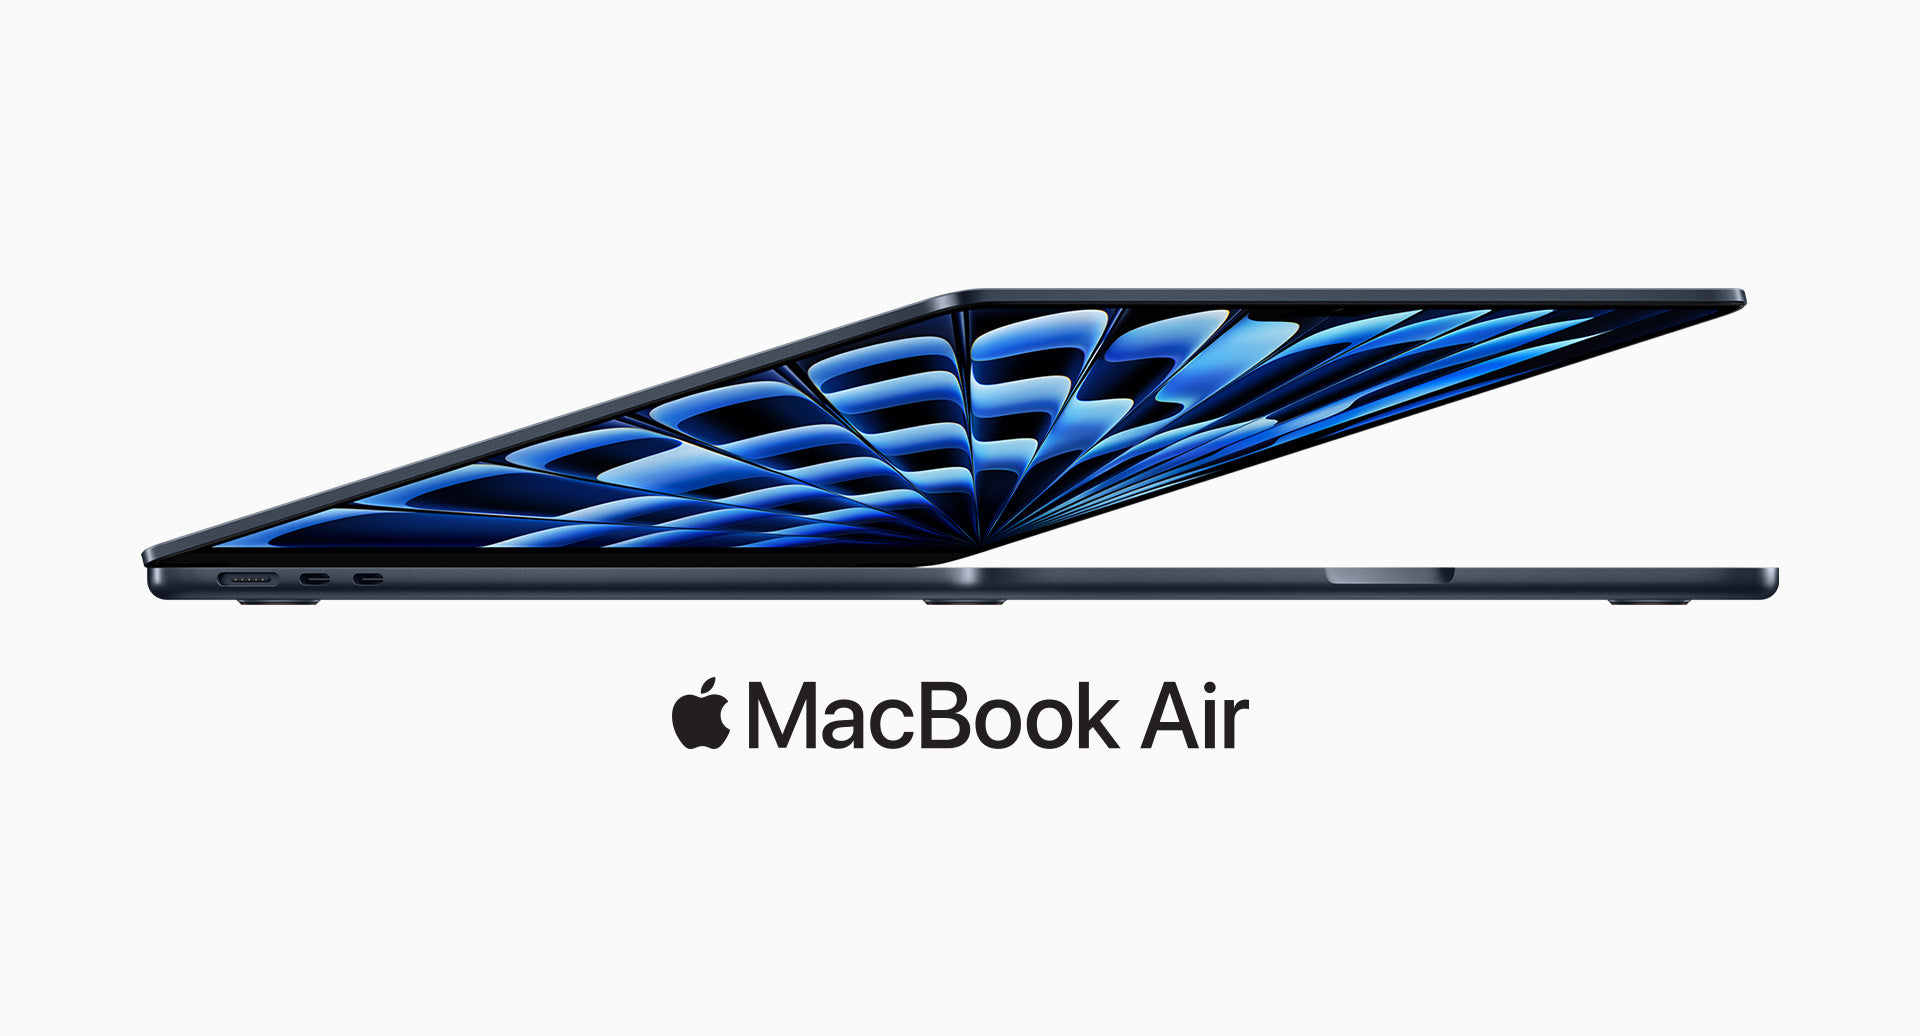 Be the First to Get the New MacBook Air M3: Preorder Now for Exclusive Deals!